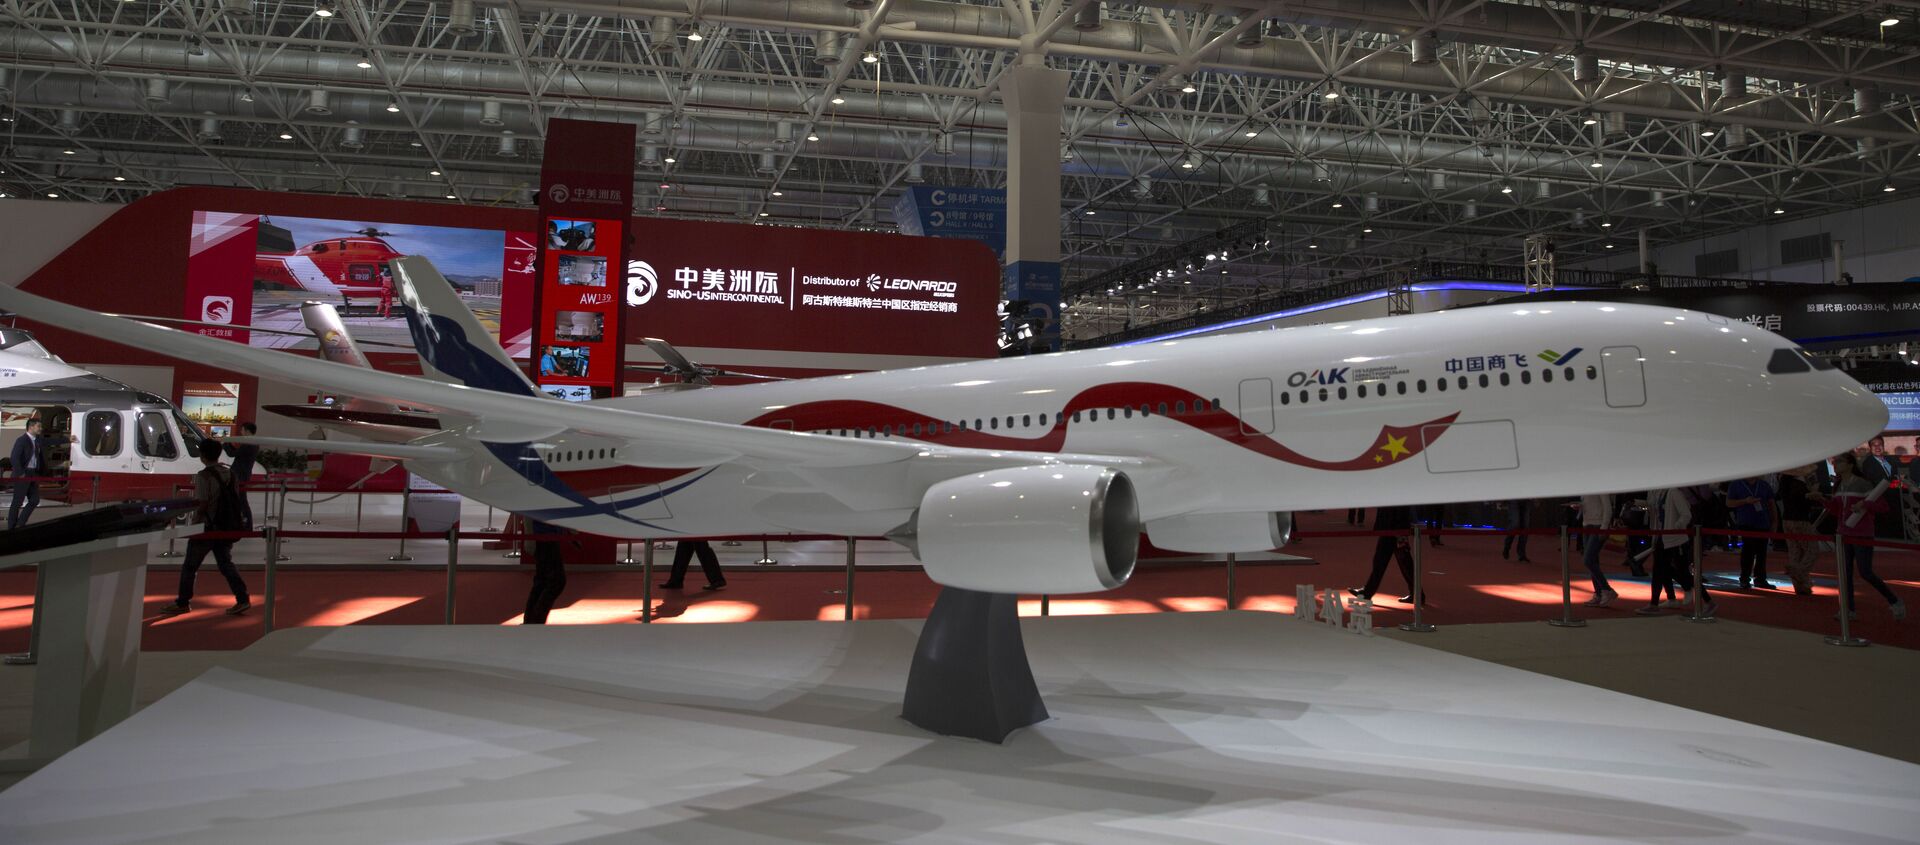 A mock-up scale model of the proposed COMAC C929, a wide-bodied commercial jet to be made by Commercial Aircraft Corporation of China (COMAC) and Russia’s United Aircraft Corporation (UAC), is seen on display during the Zhuhai Air Show in Zhuhai, southern China's Guangdong province, on November 3, 2016. - Sputnik International, 1920, 04.12.2020